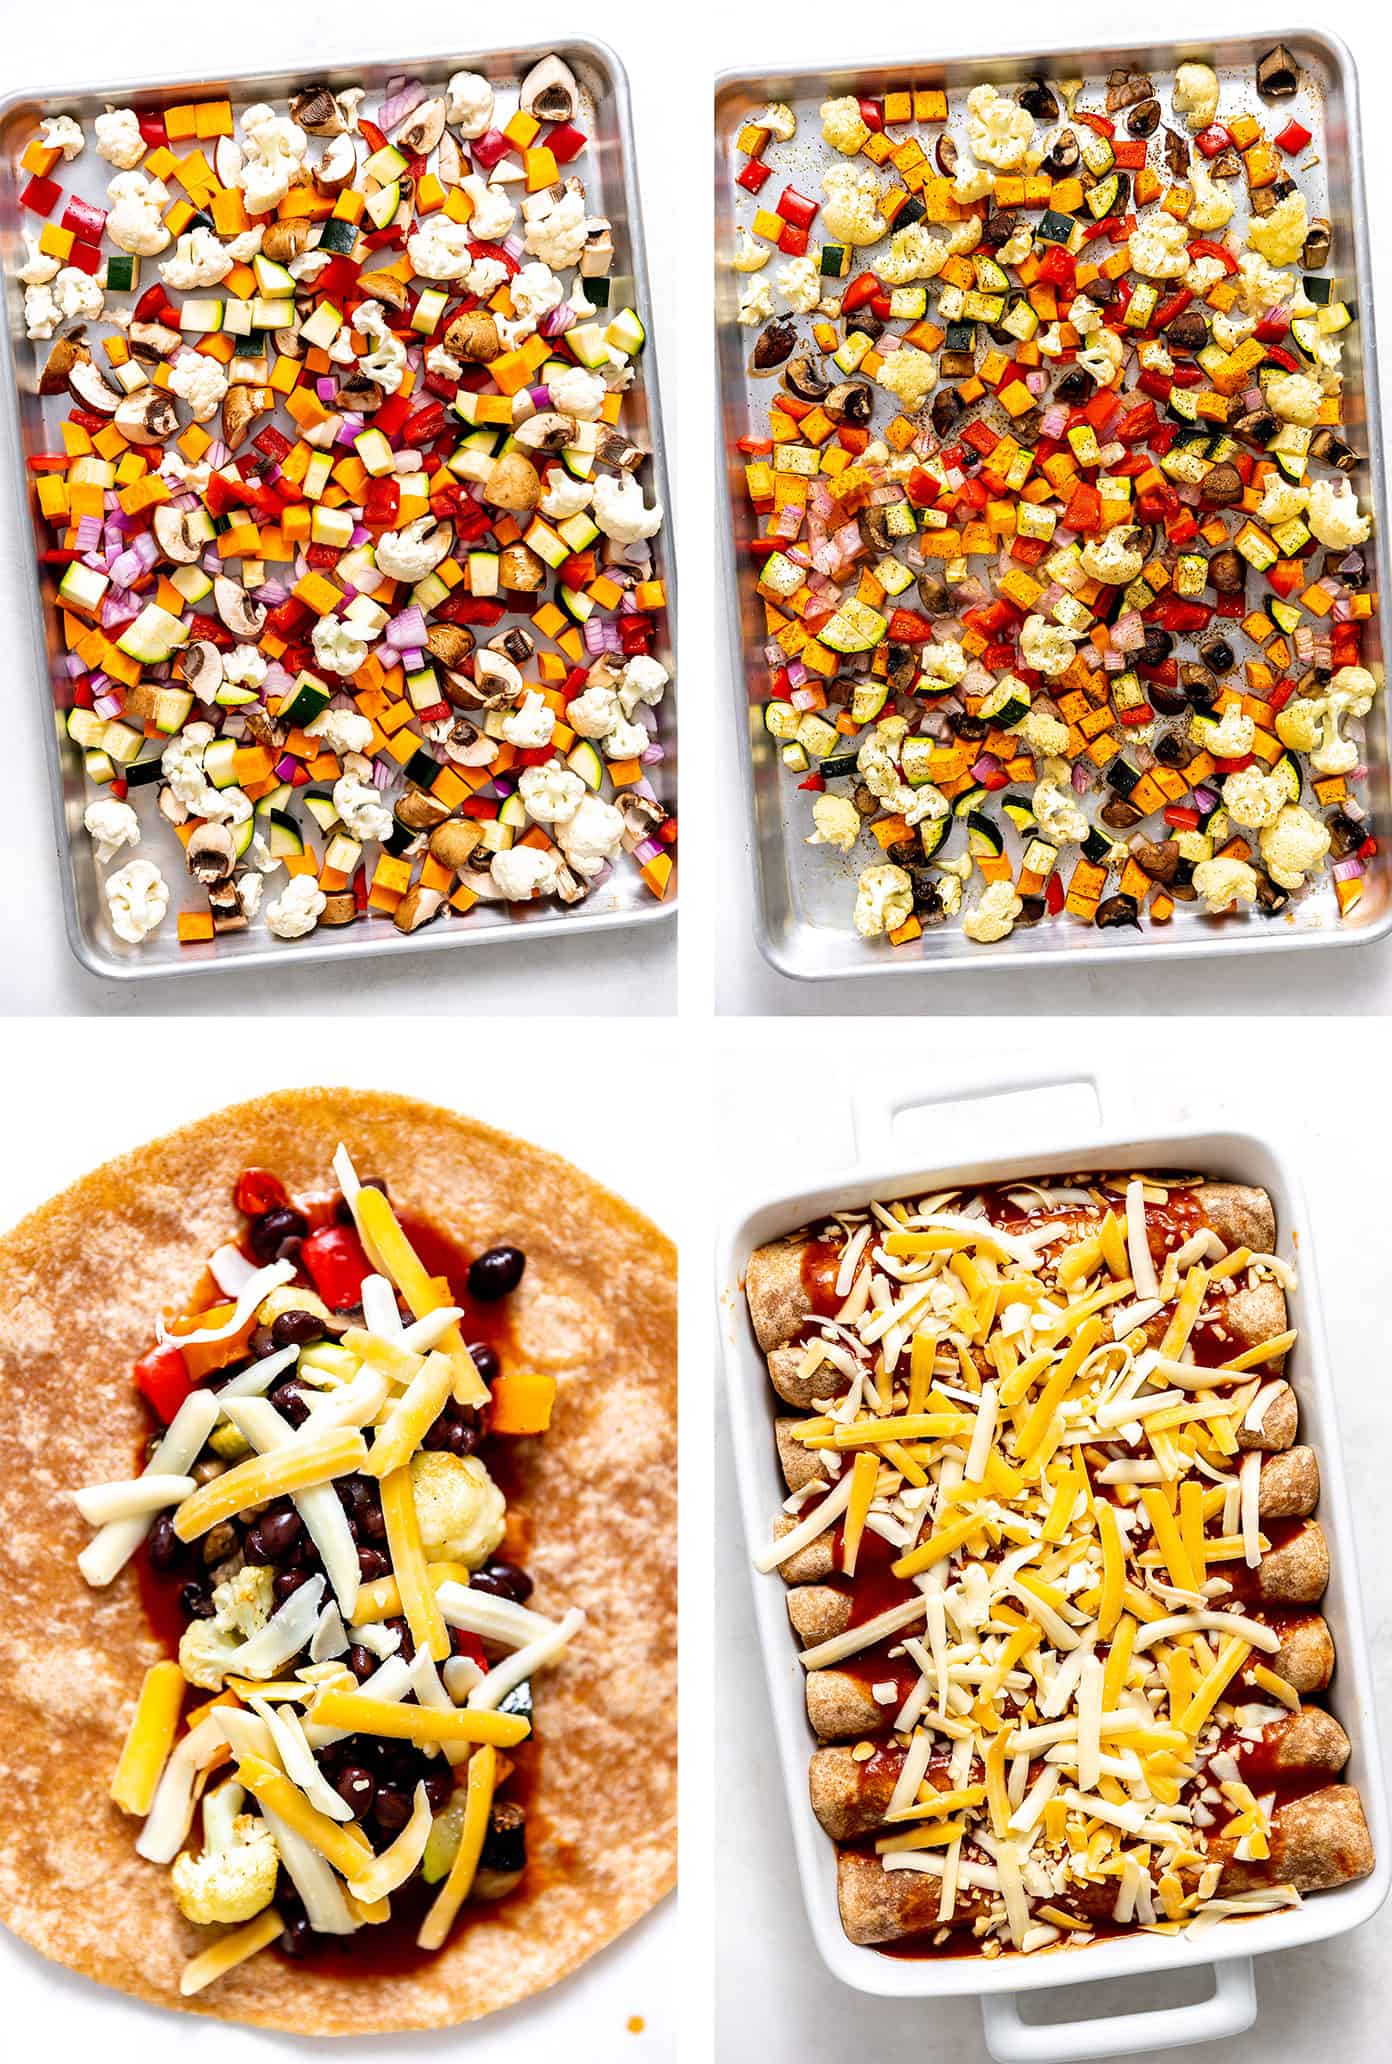 Step by step photos showing how to make roasted veggie enchiladas